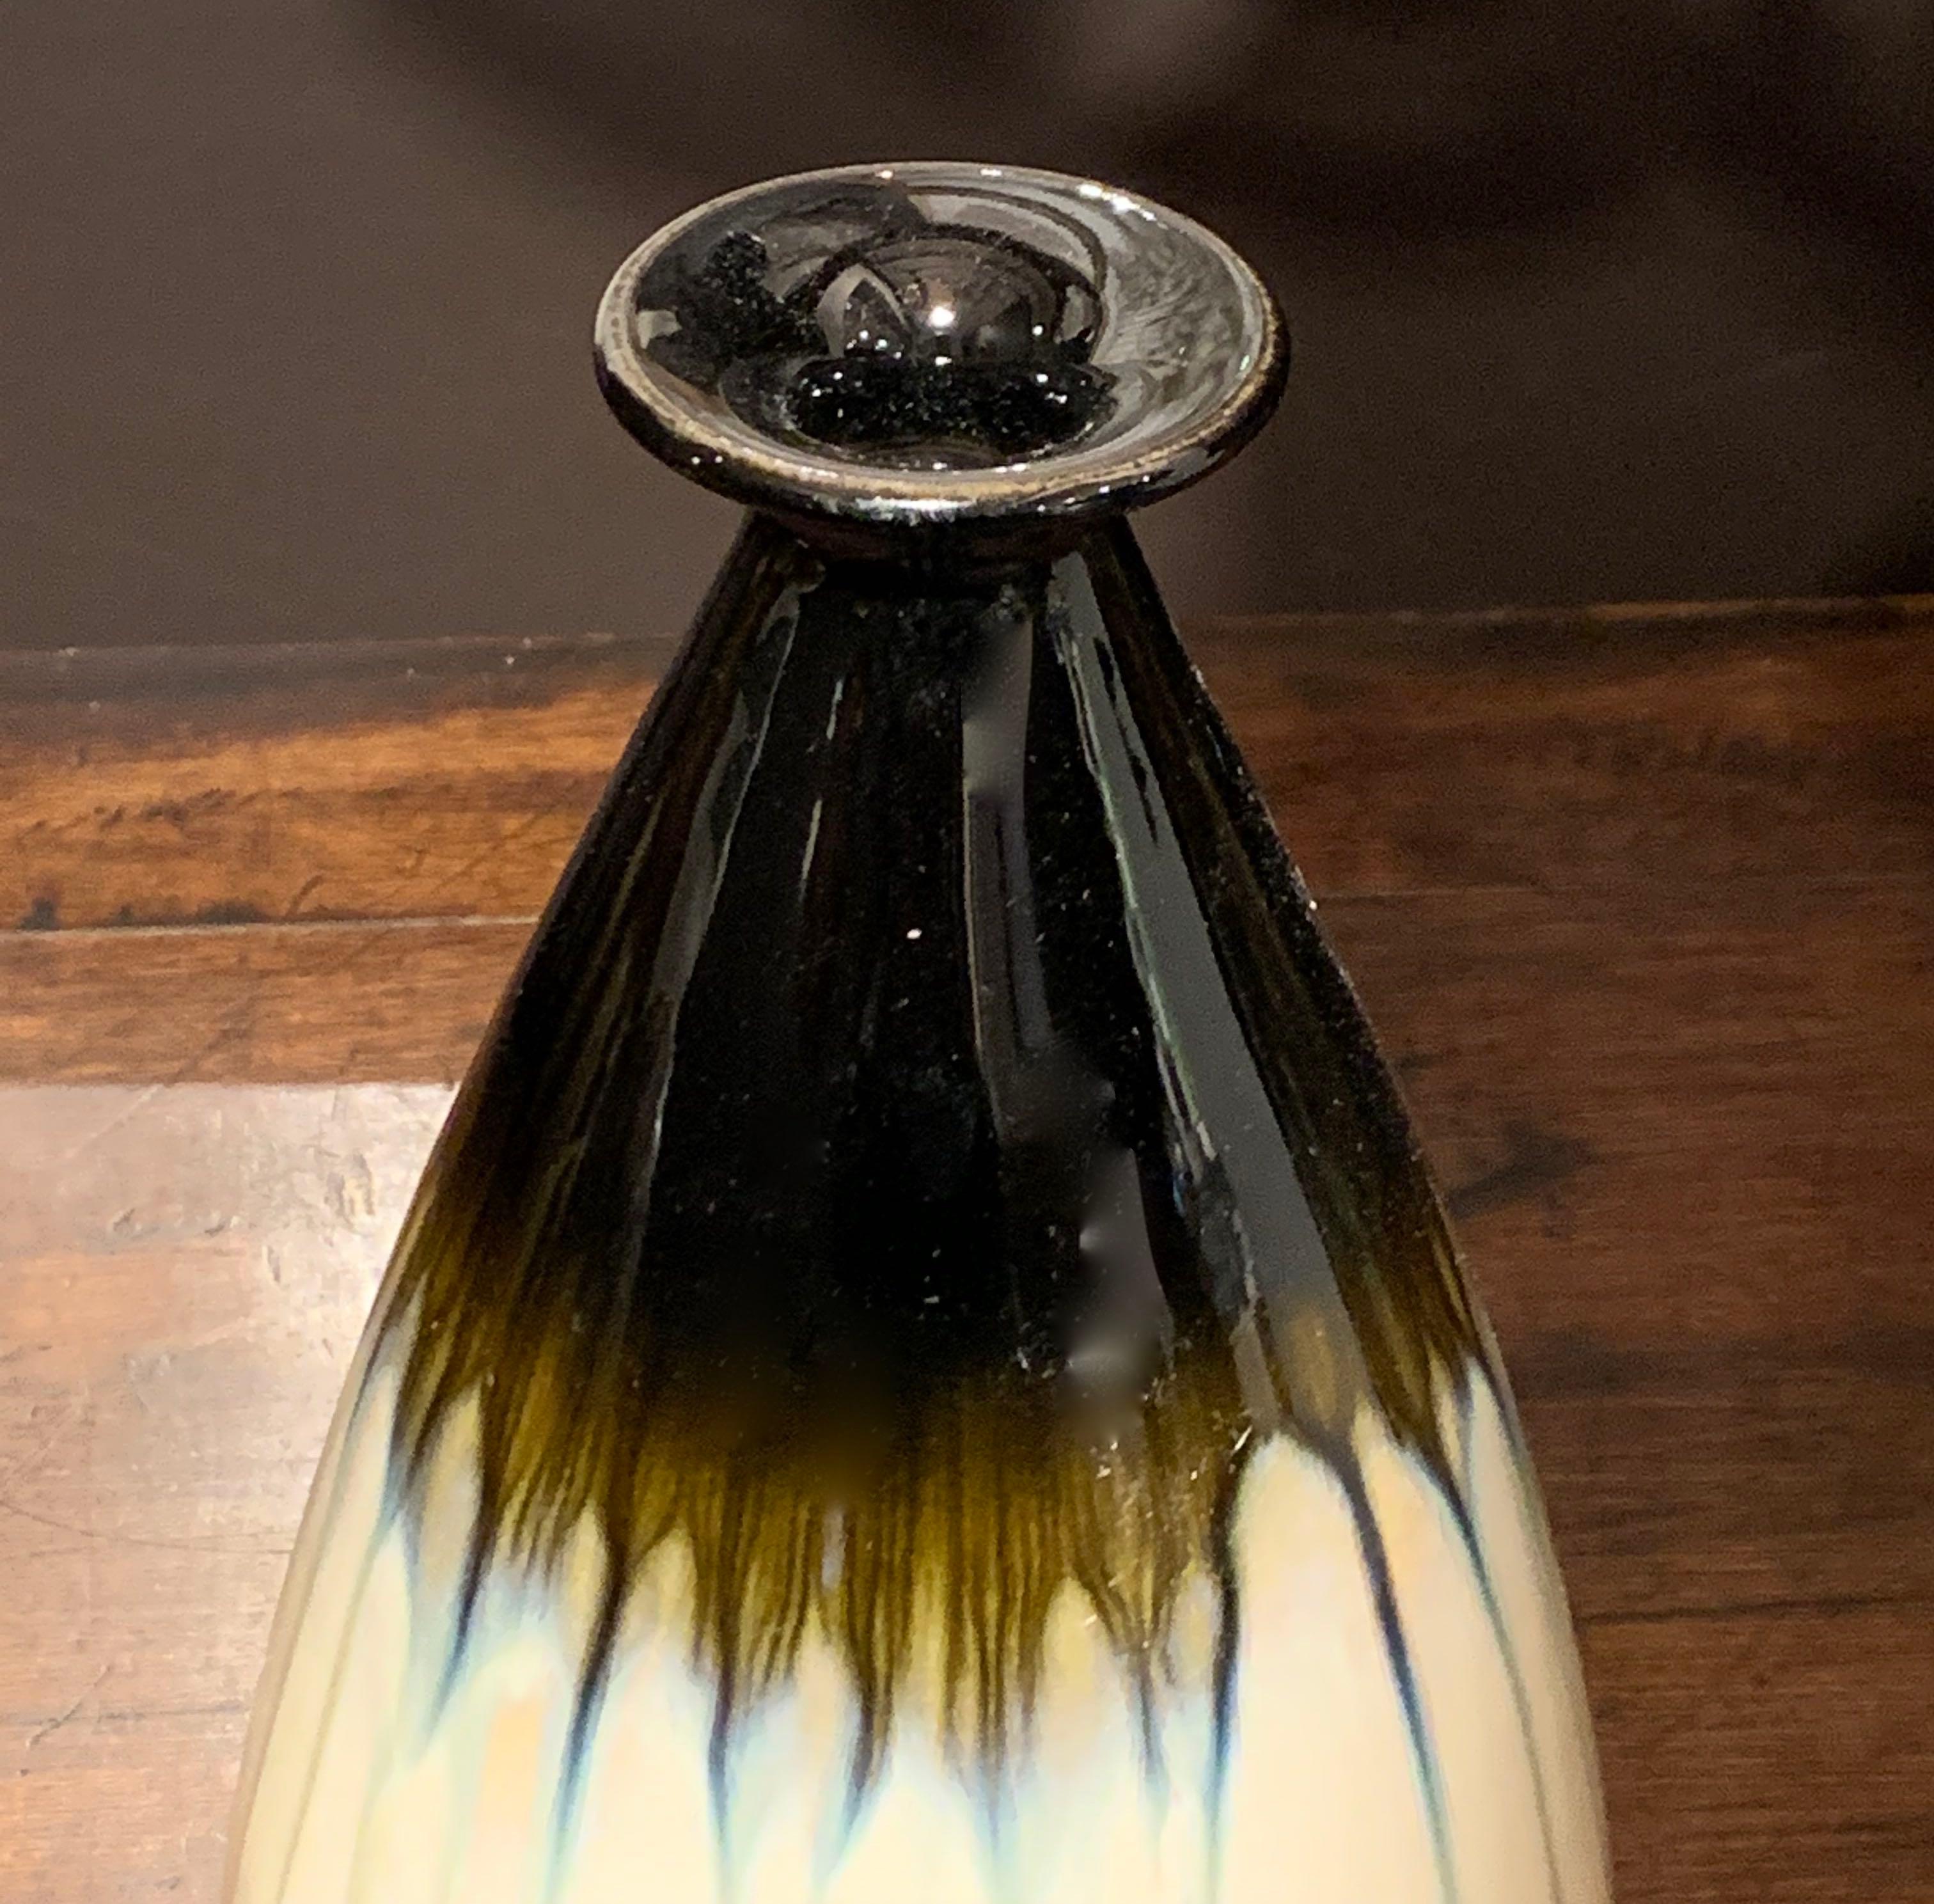 Contemporary Chinese ceramic vase with decorative drip glaze.
Cream ground with shades of brown and black.
Dark brown at the top and bottom with a cream center and light brown horizontal drip glaze.
  
 